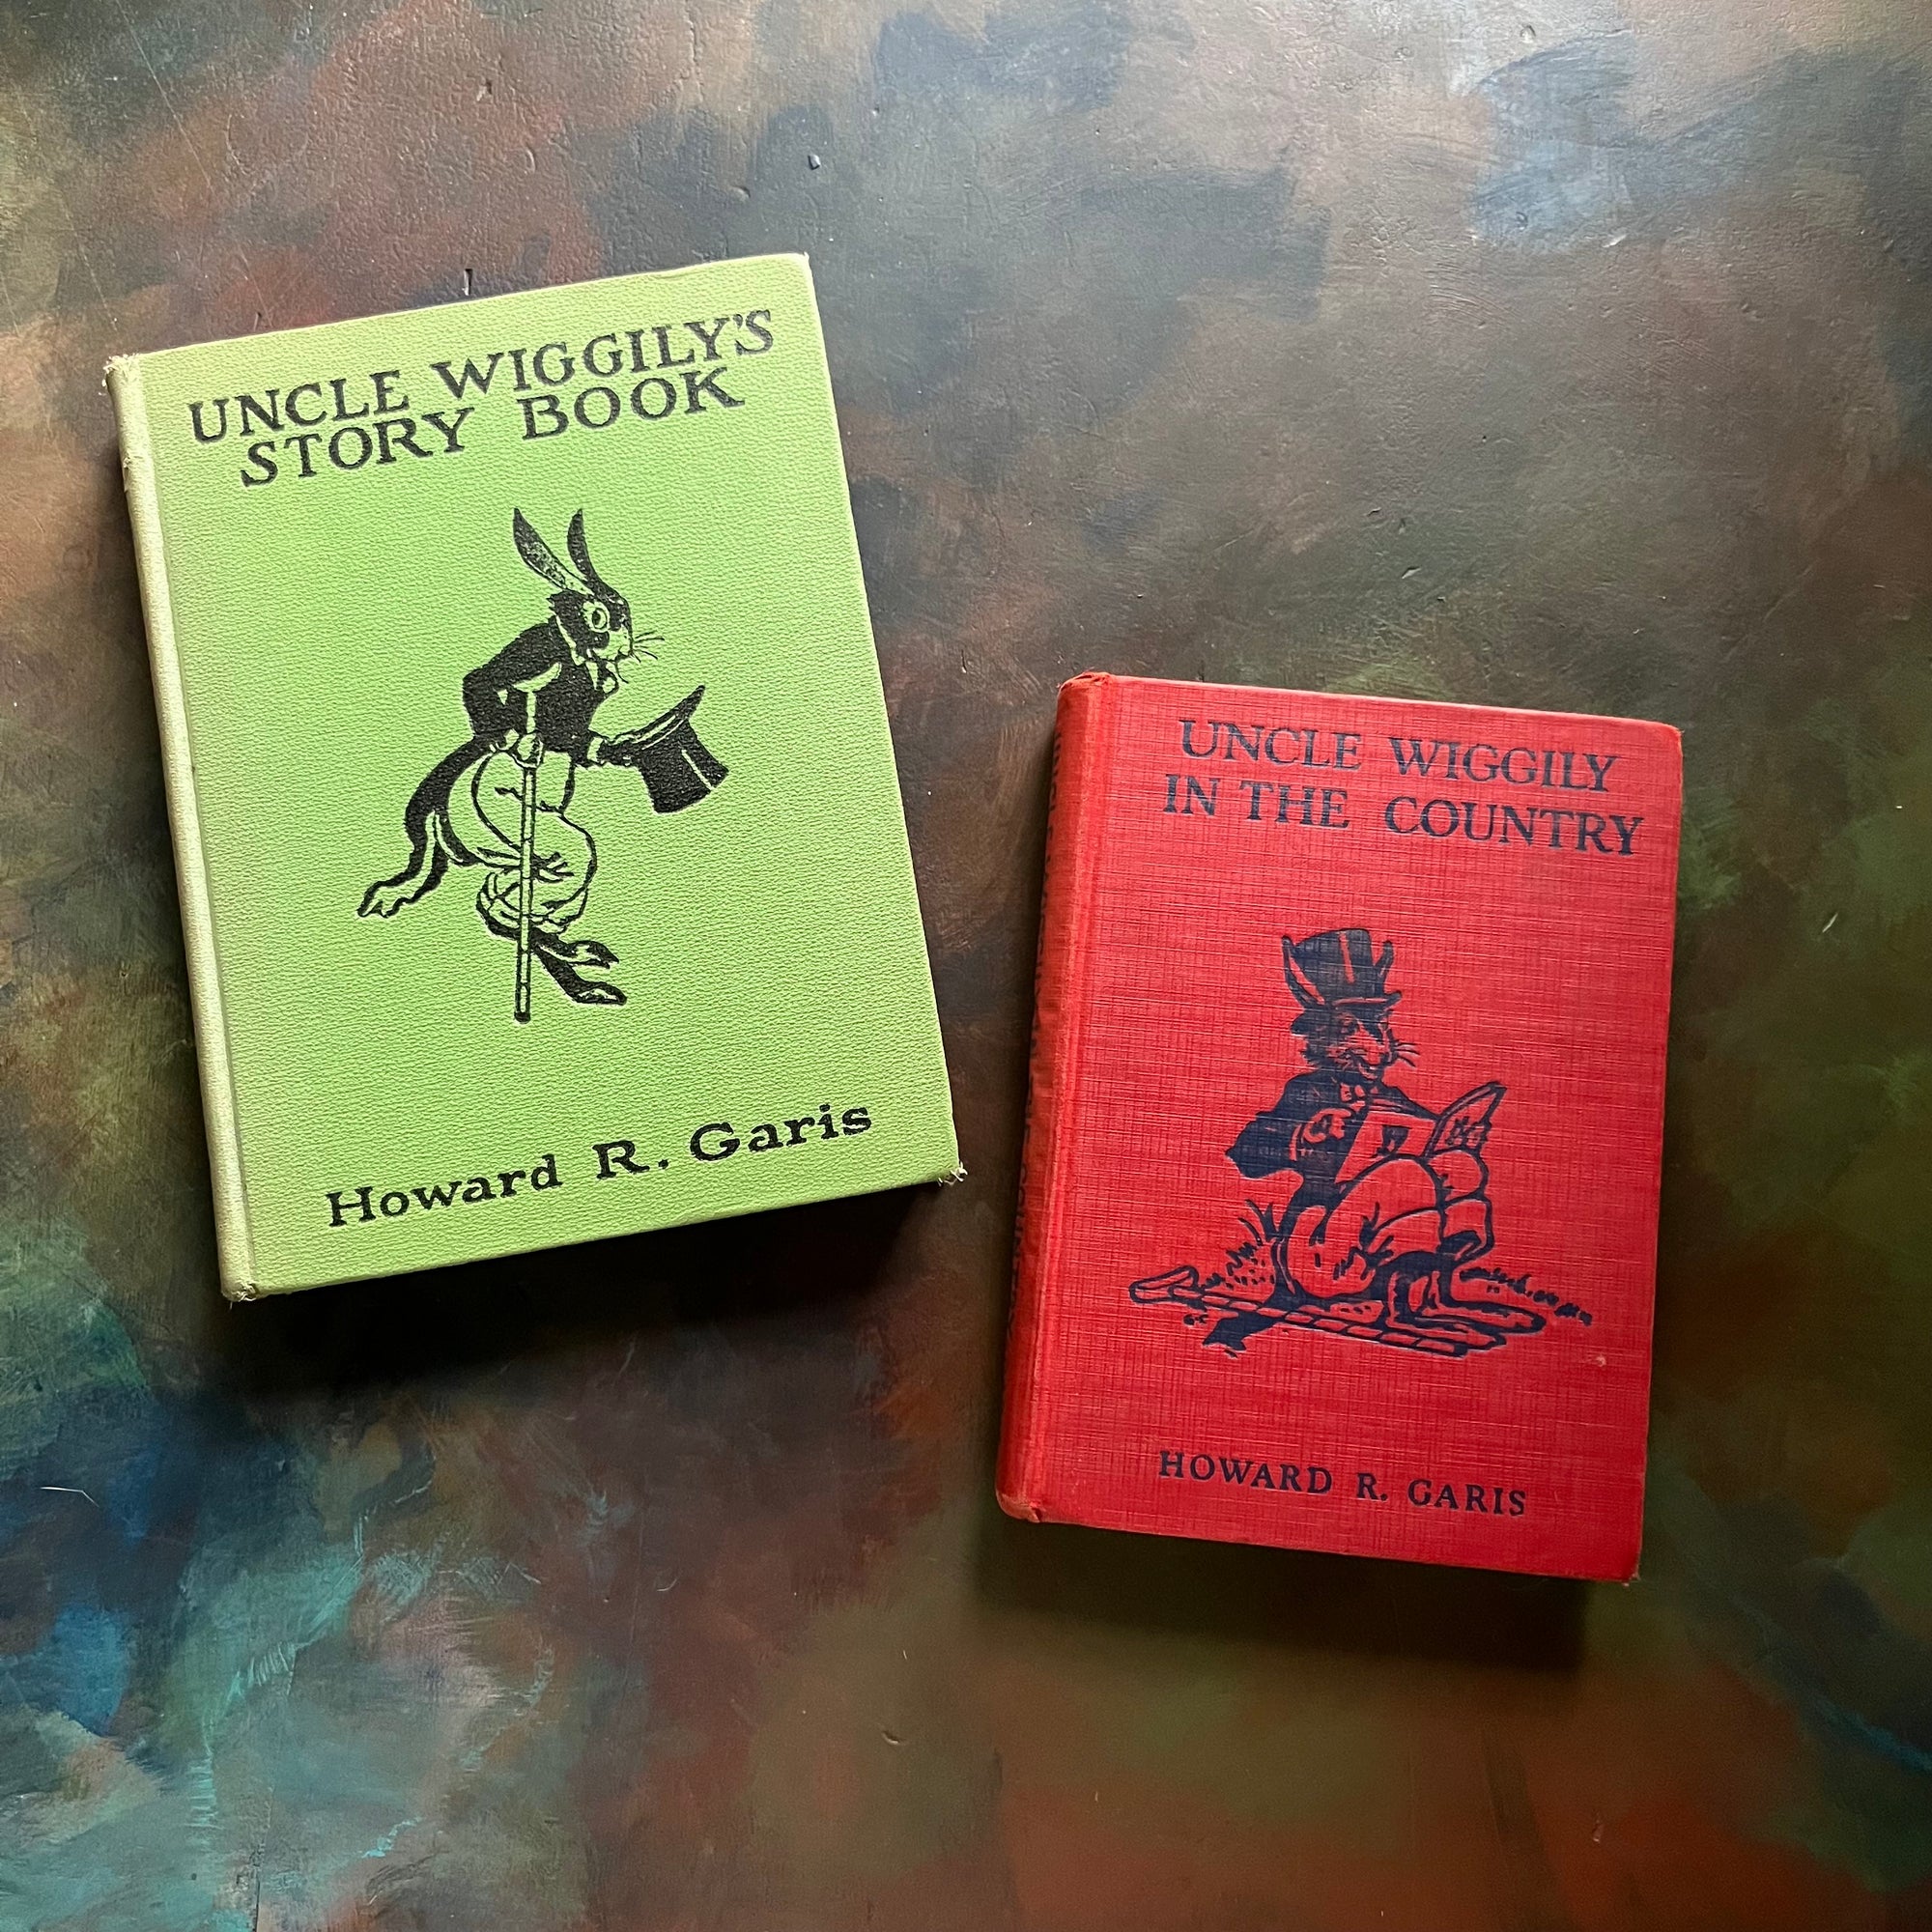 Pair of Uncle Wiggily Books written by Howard R. Garis-Uncle Wiggily's Story Book and Uncle Wiggily in the Country-antique children's books-view of the embossed front covers